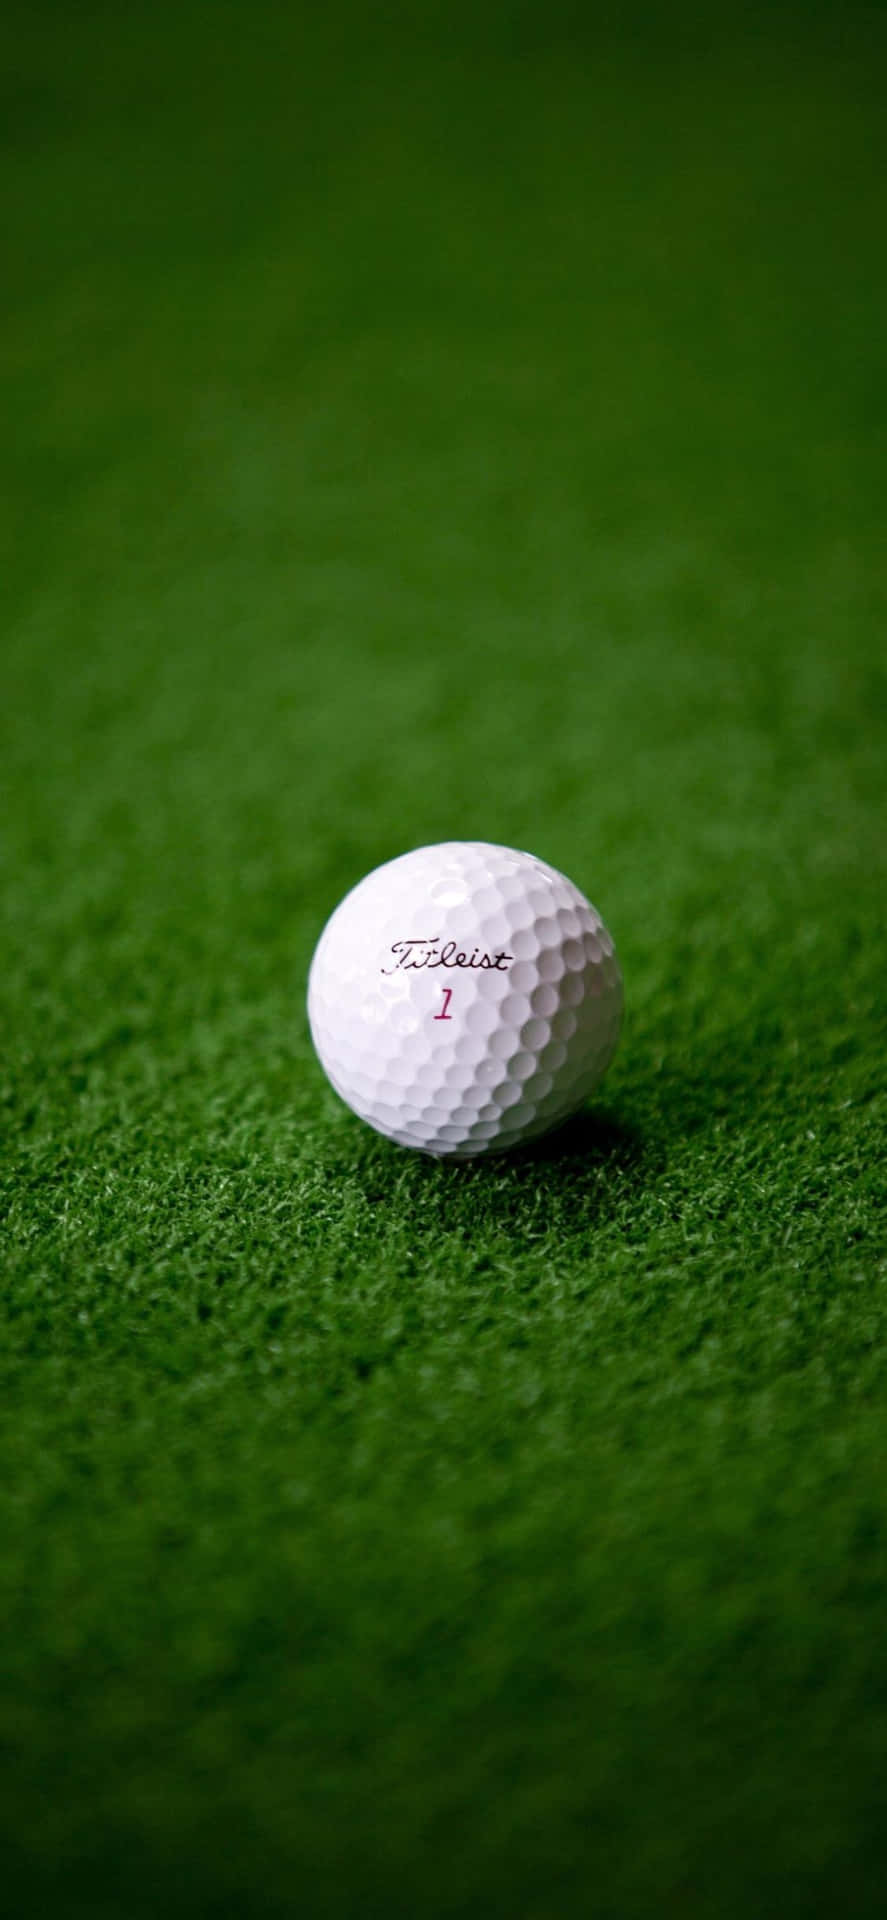 100+] Iphone Xs Golf Background s 